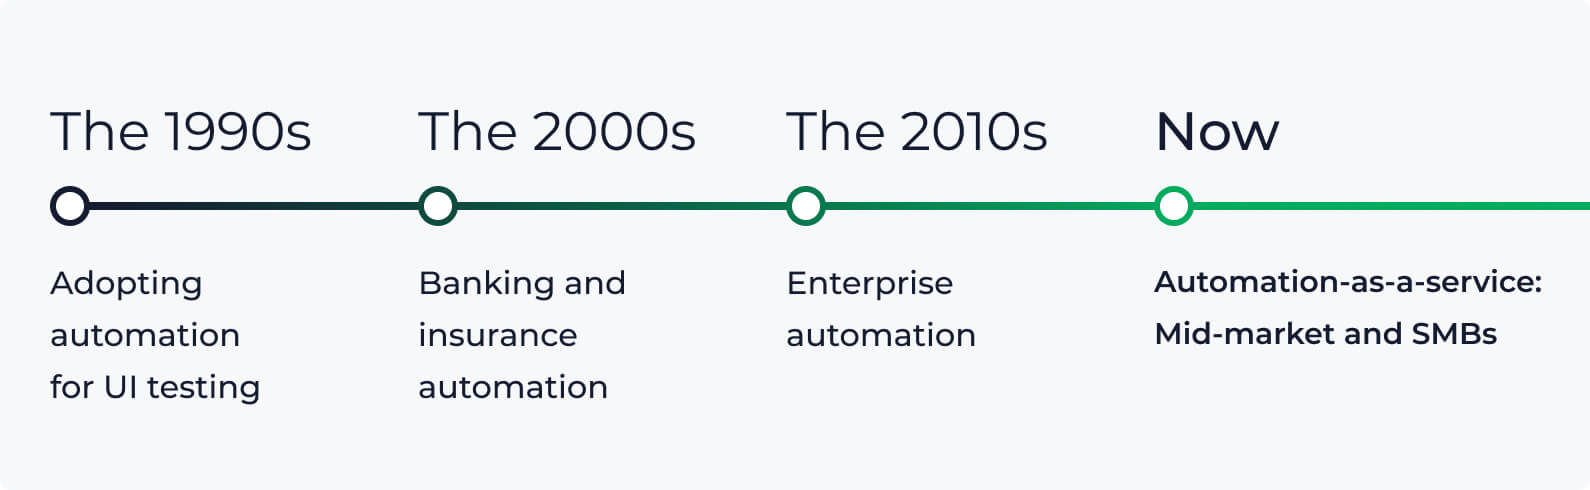 History of RPA timeline